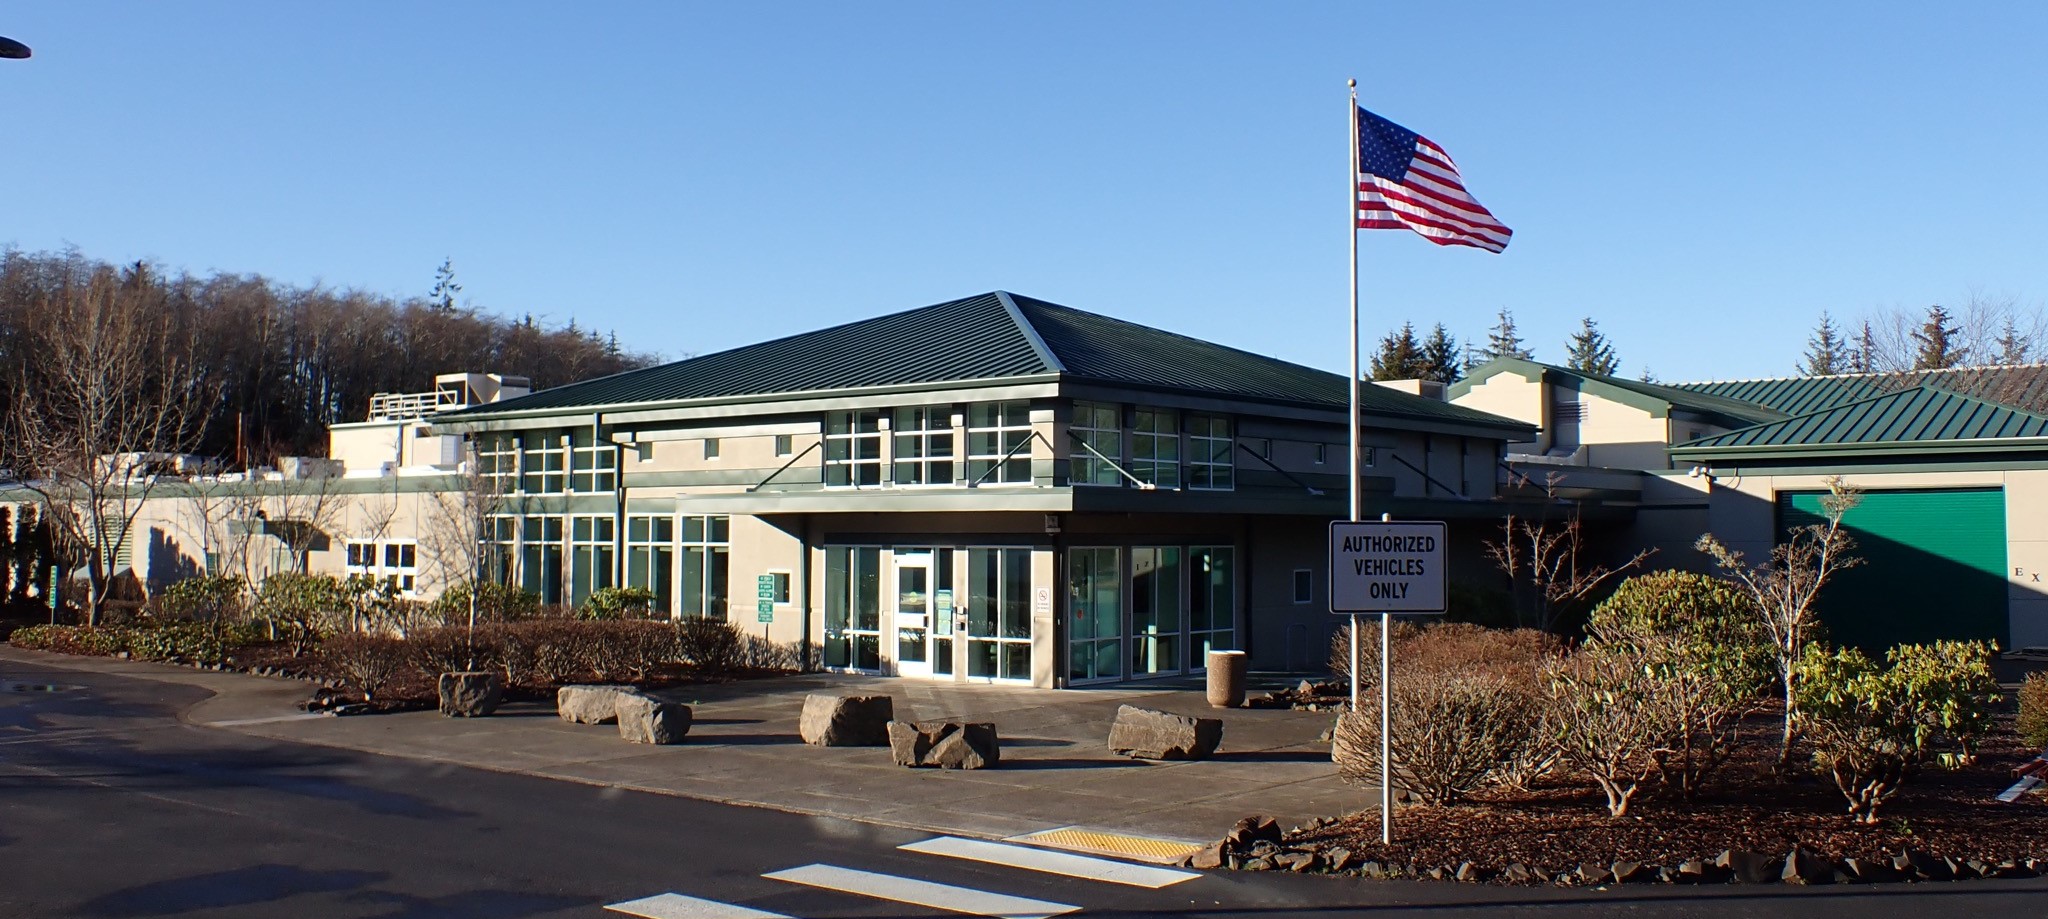 Image of Clatsop County Sheriff and Corrections